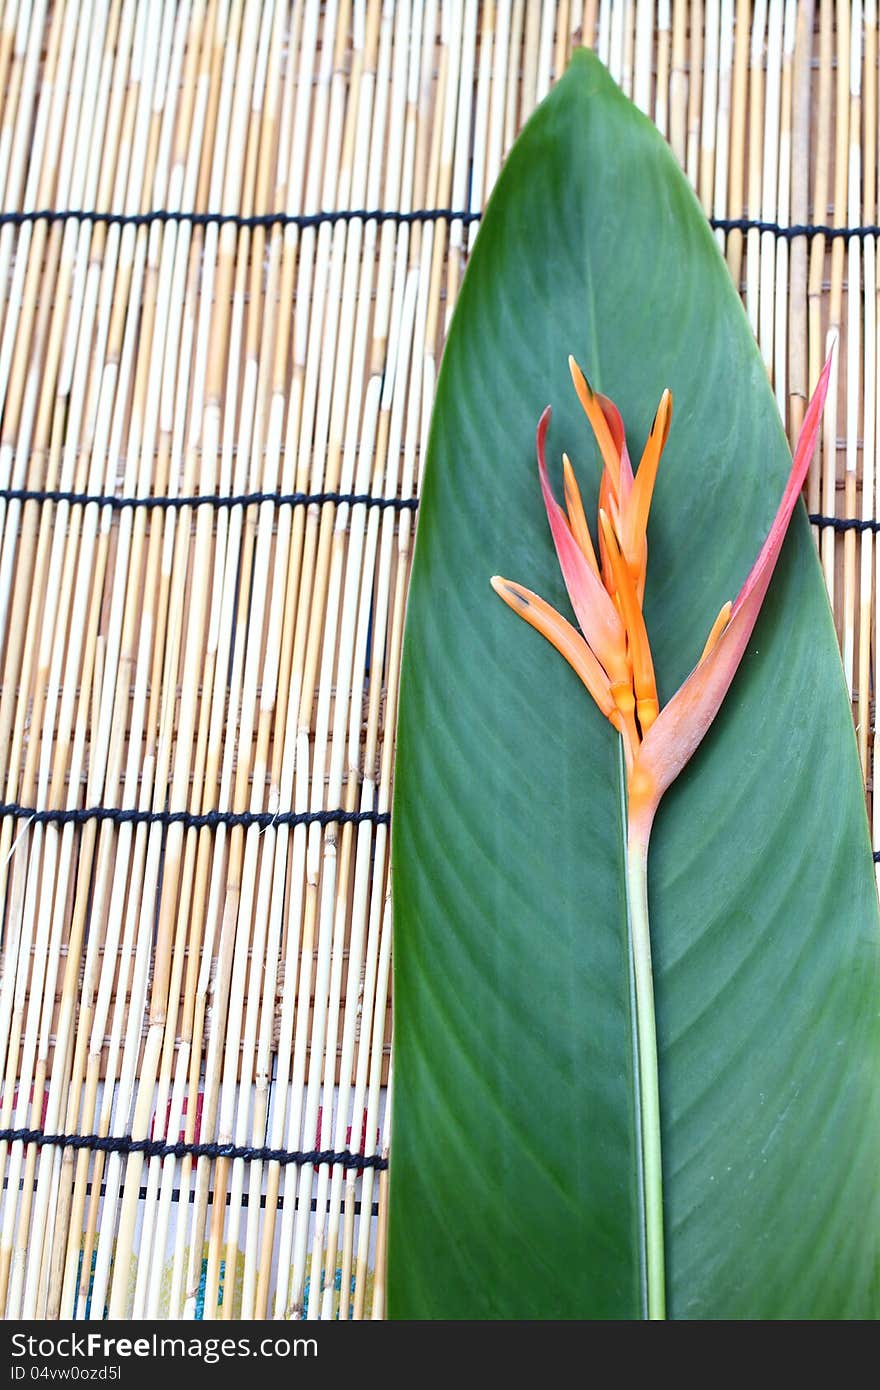 Heliconia flower and its leaf, put on the table cloth made from wooden. Heliconia flower and its leaf, put on the table cloth made from wooden